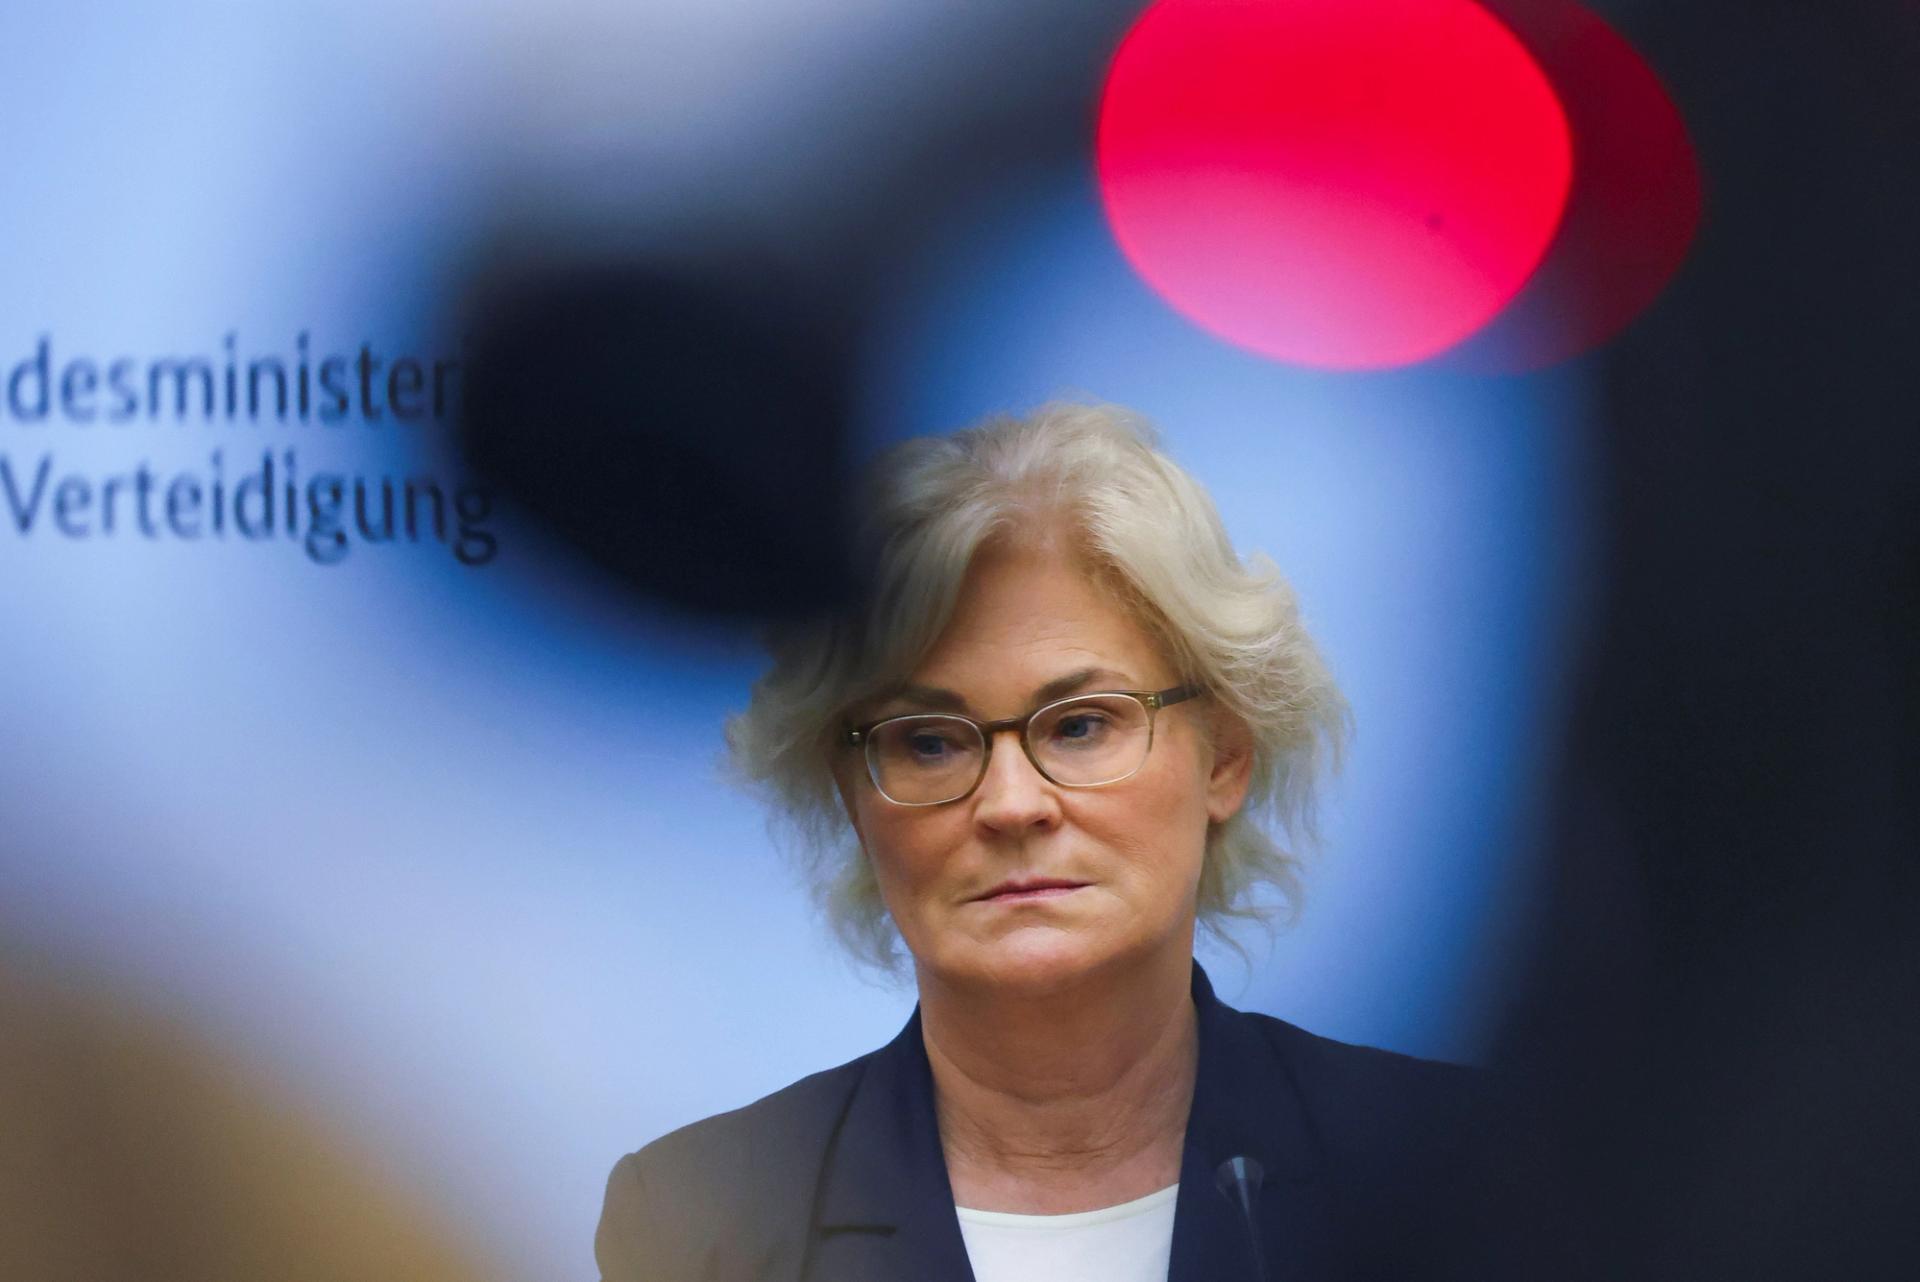 German Defence Minister Christine Lambrecht attends a news conference on the Puma battle tanks, following a meeting at the Ministry of Defence in Berlin, Germany, January 13, 2023.